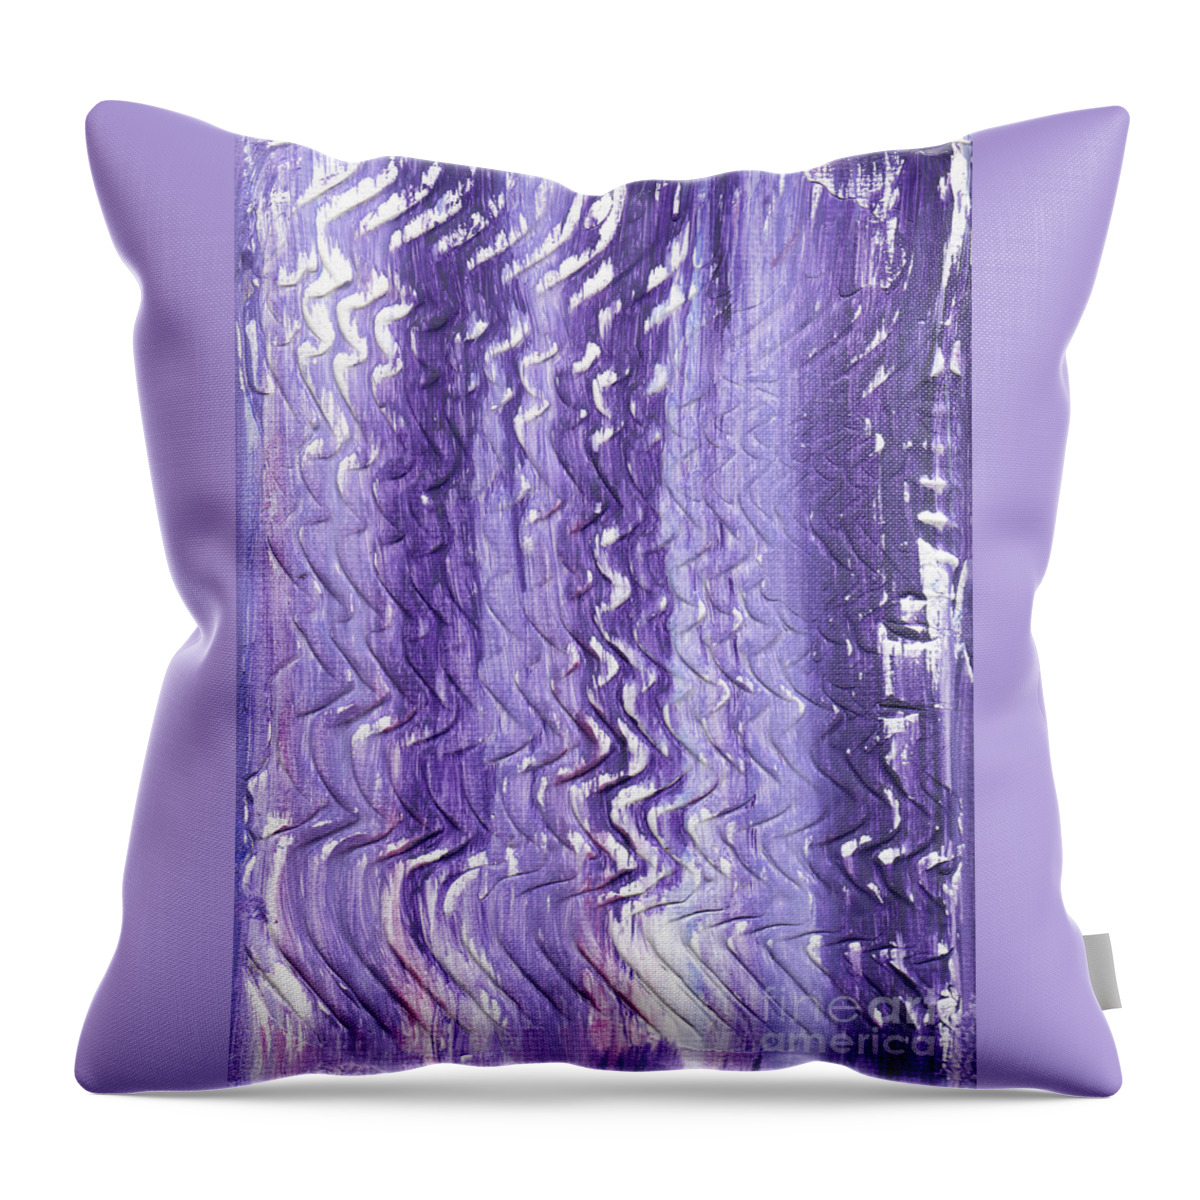  Throw Pillow featuring the painting 50 by Sarahleah Hankes